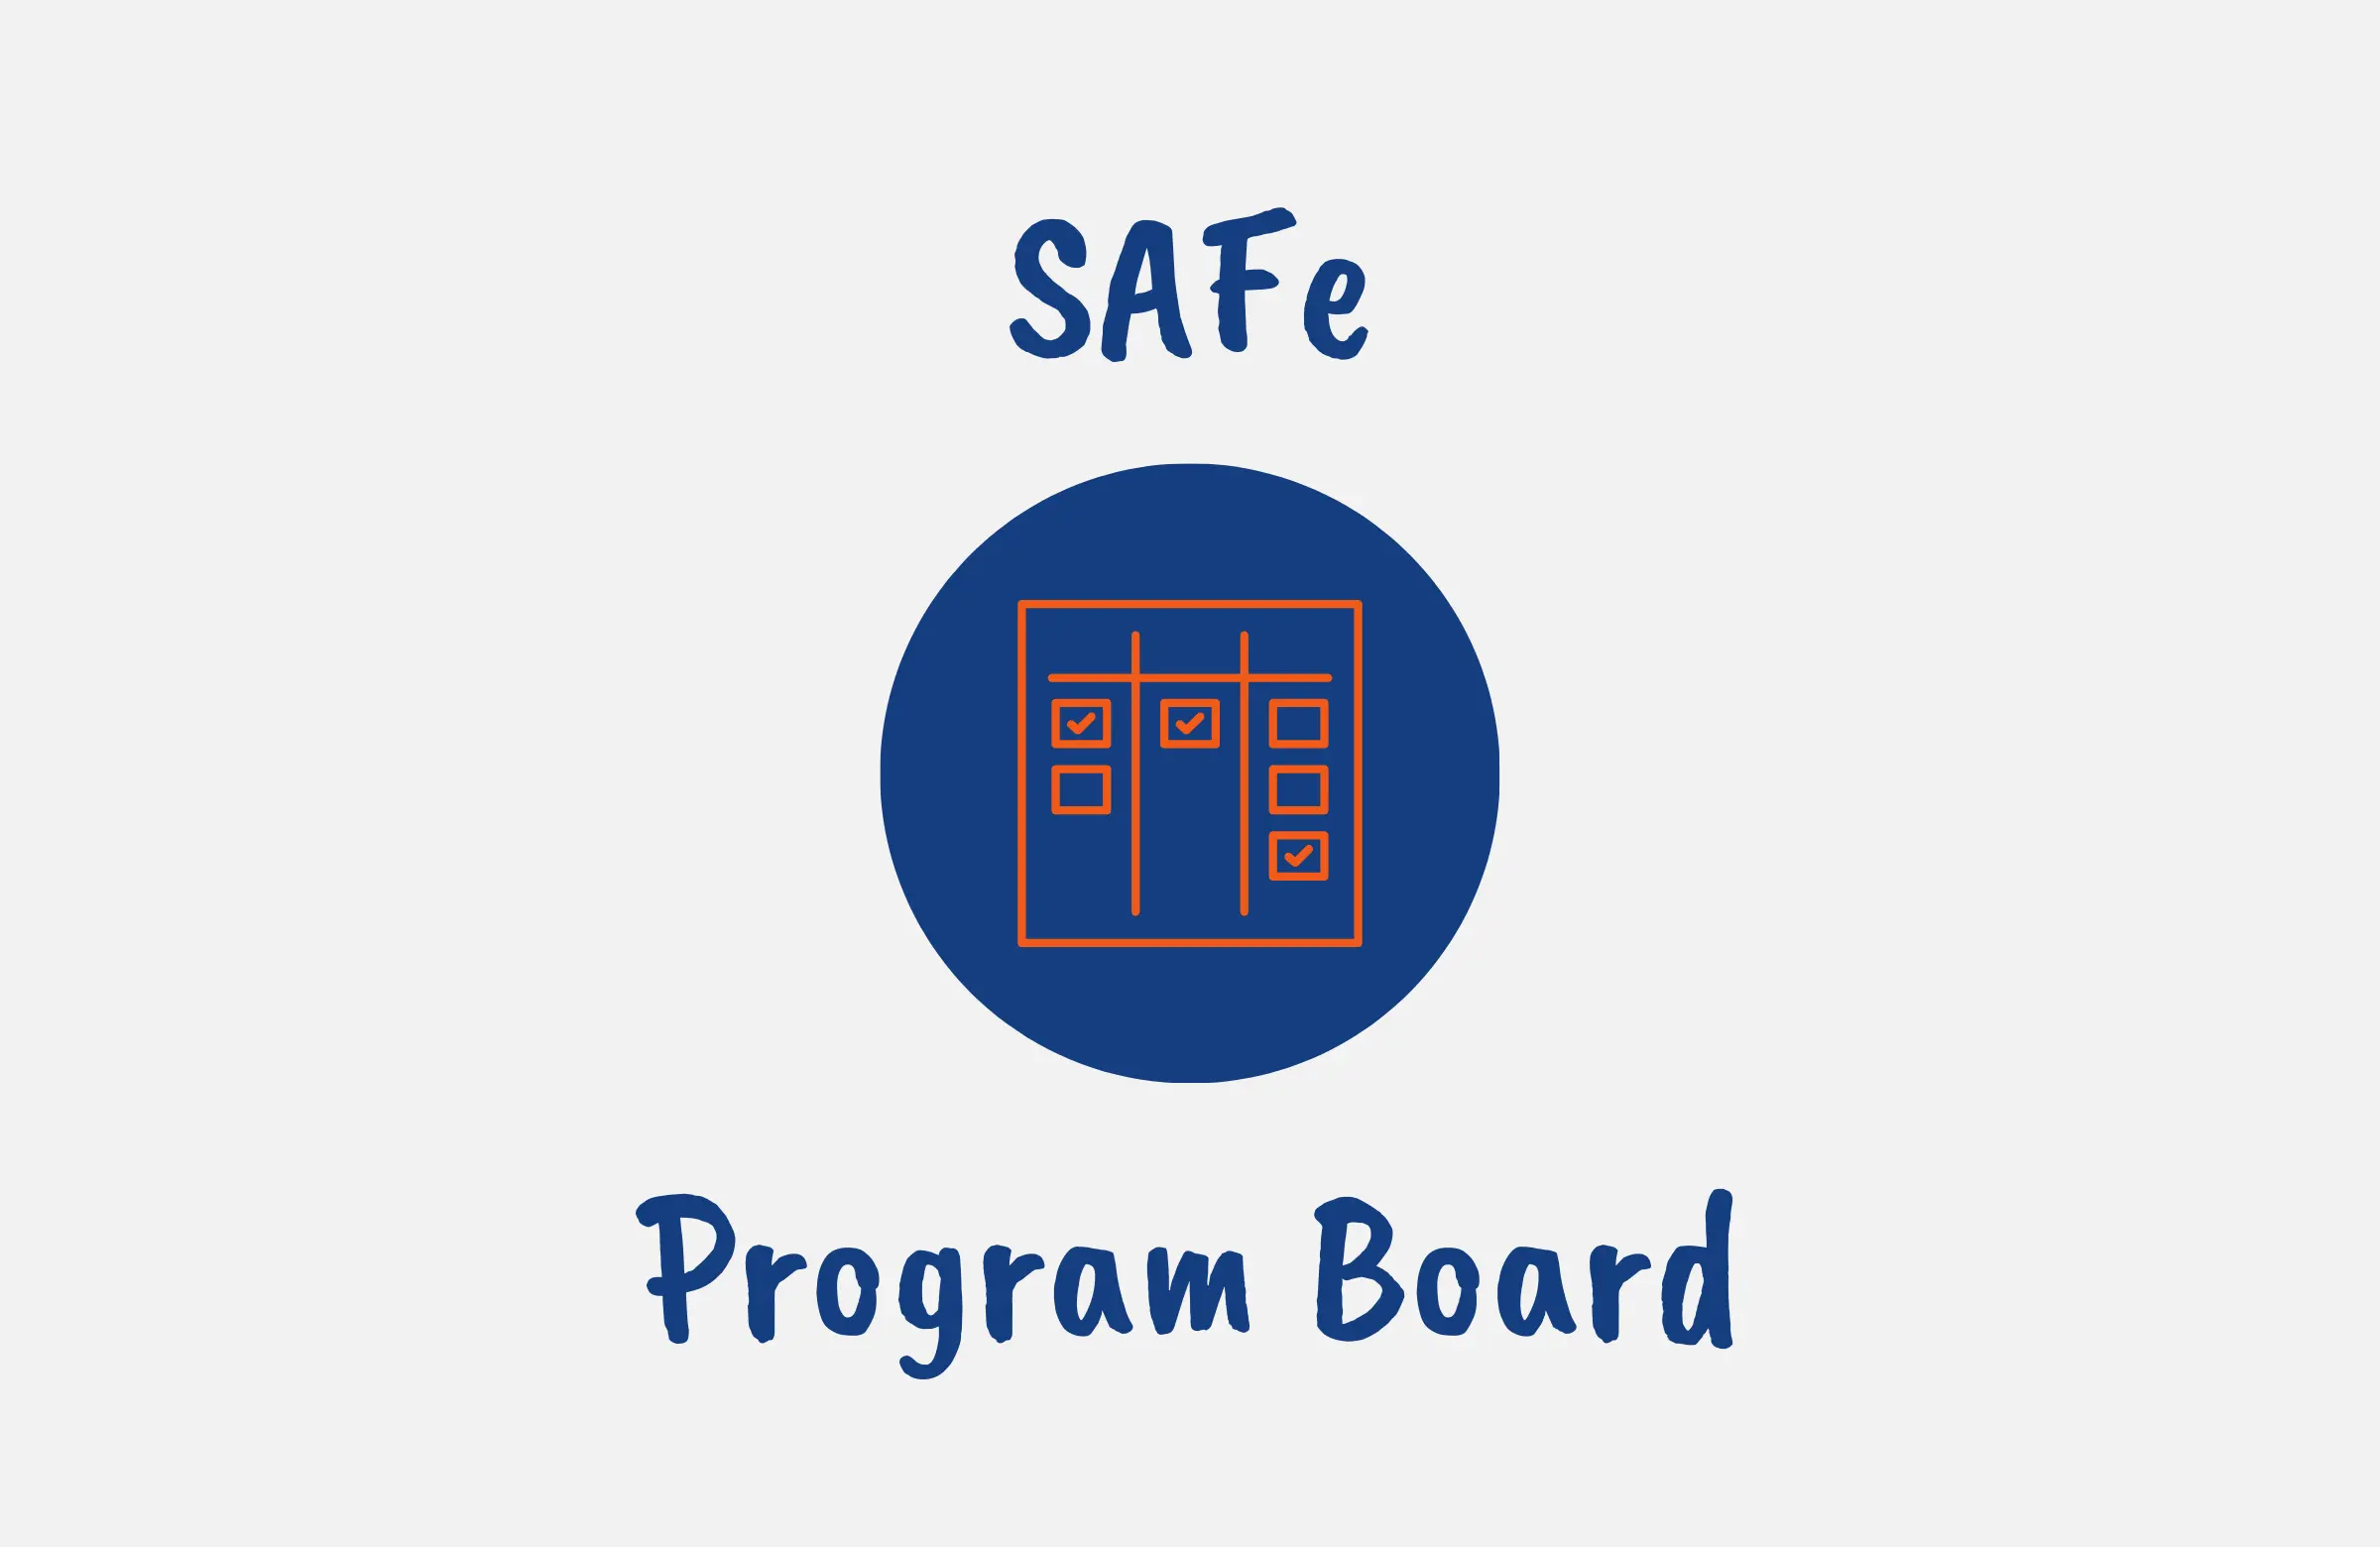 what is a program board in SAFe